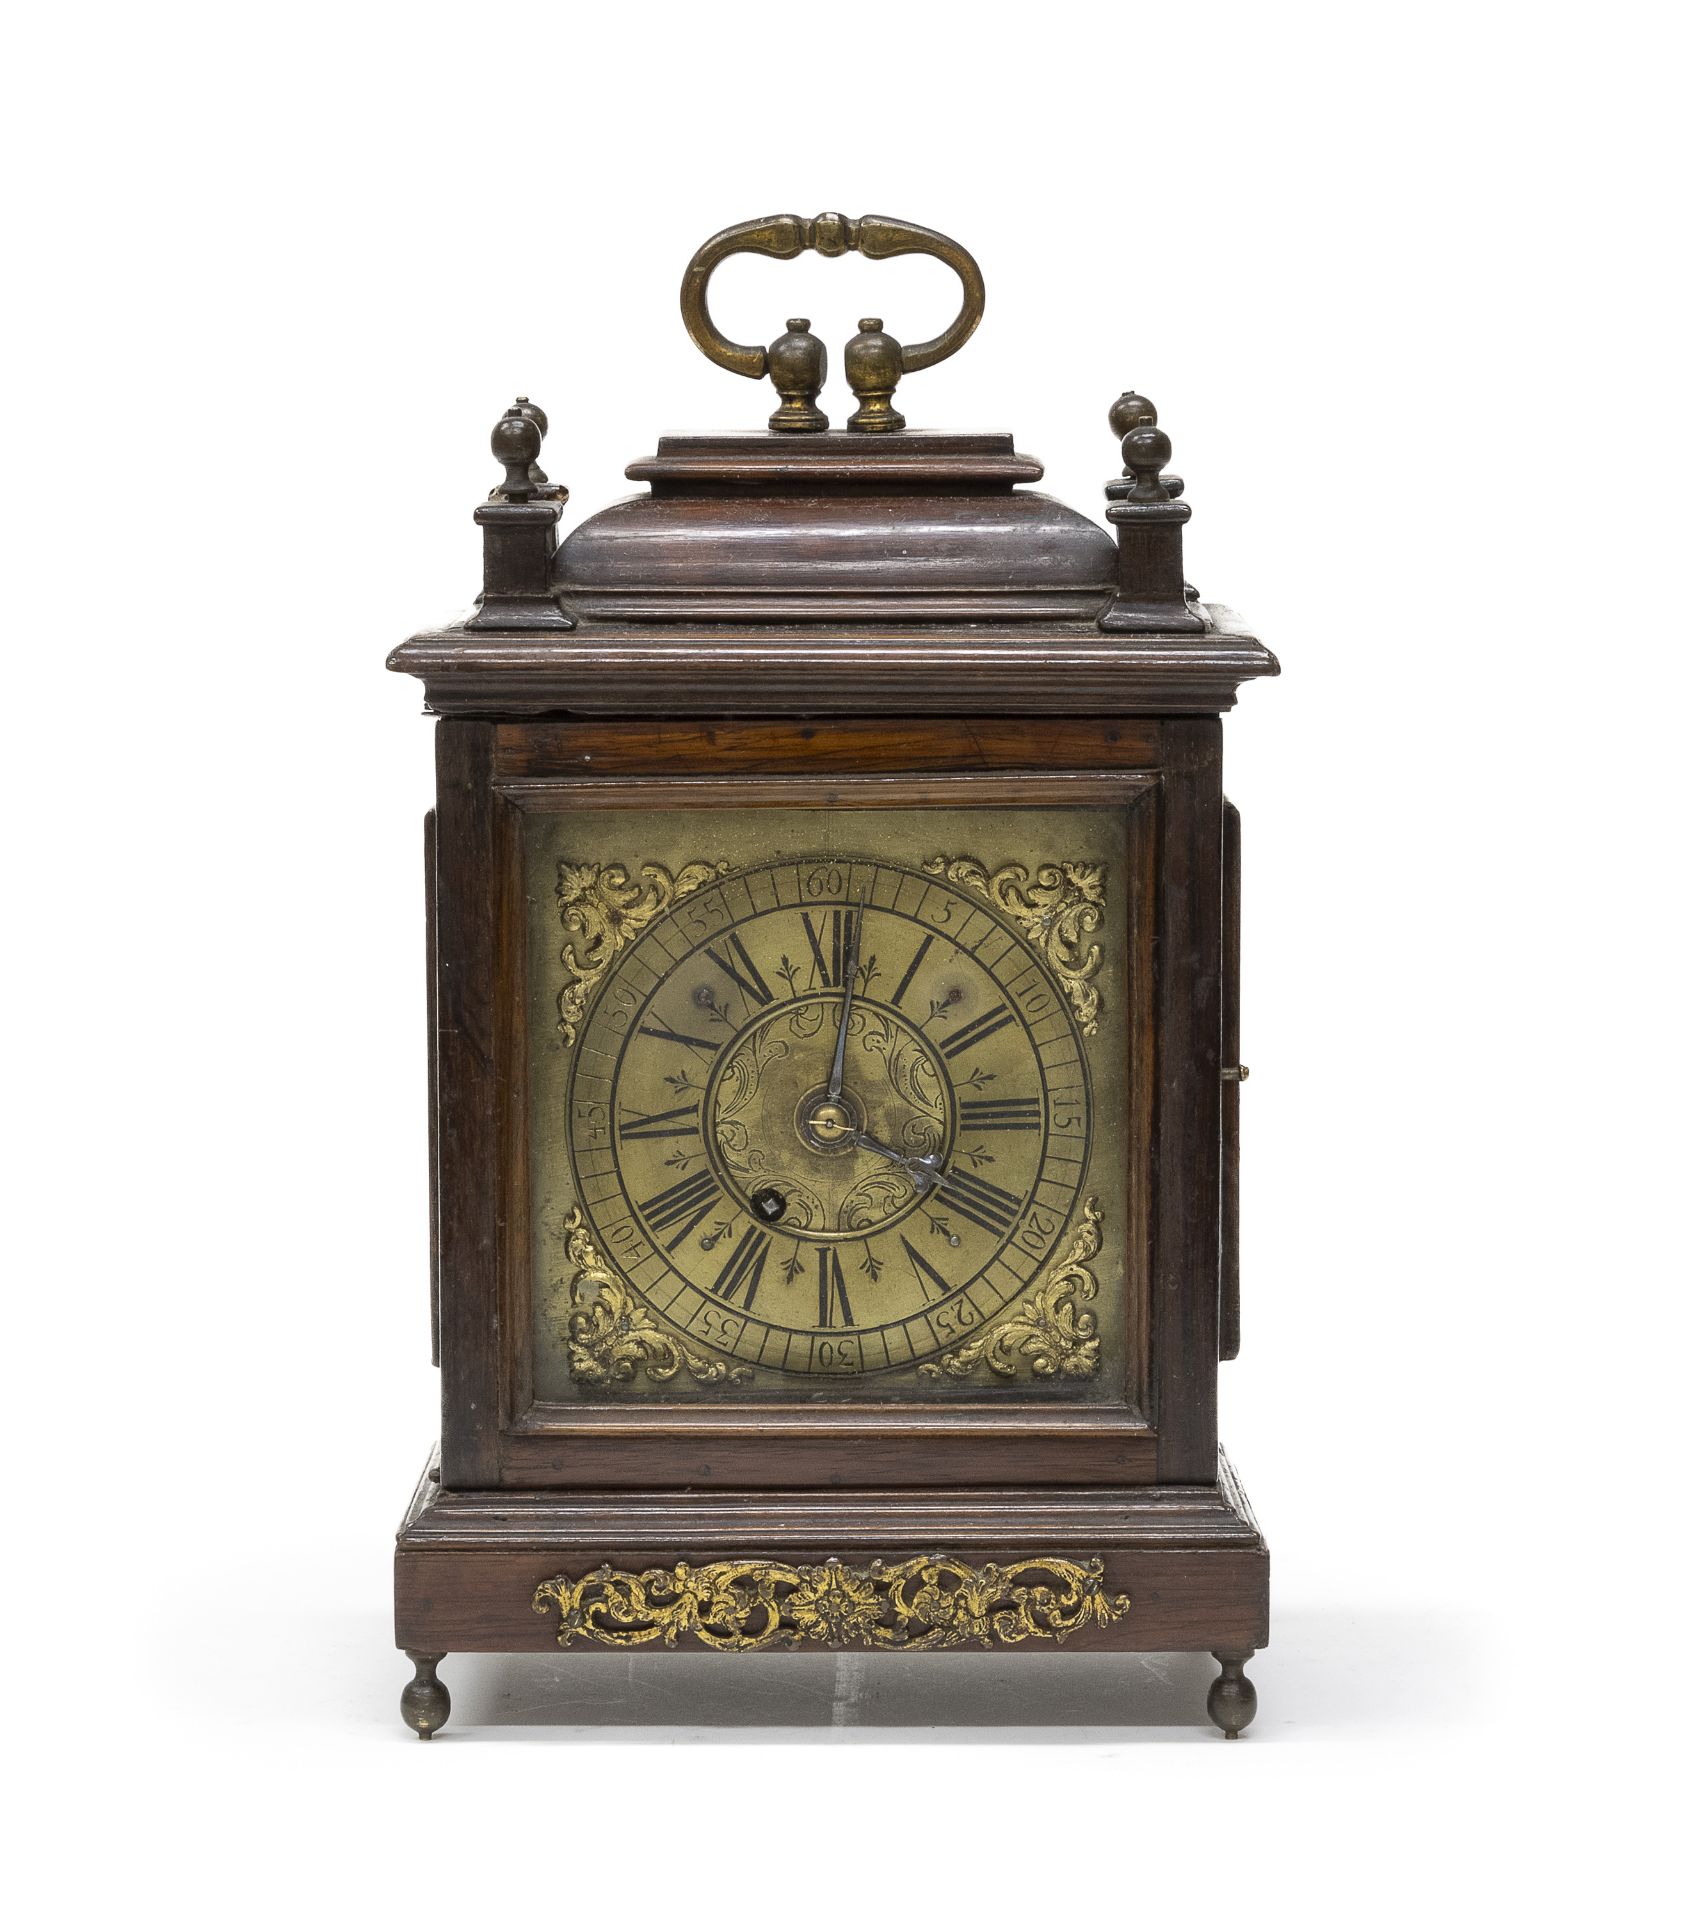 TIME ONLY CLOCK IN ROSEWOOD 18TH CENTURY ITALY